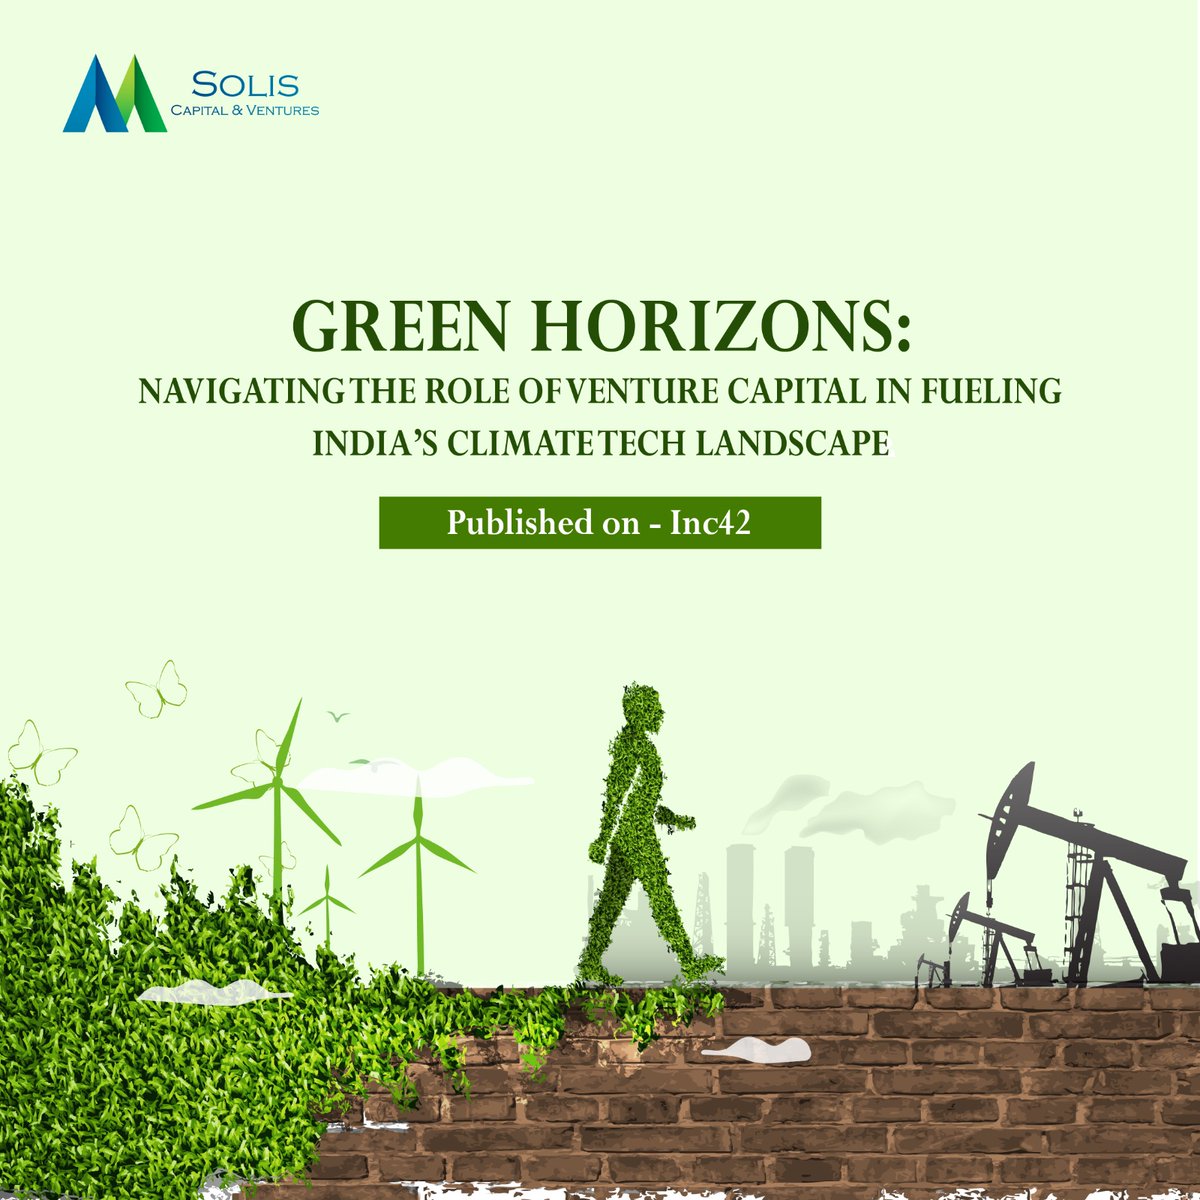 #Green_Horizons: Navigating The Role Of #Venture #Capital In #Fueling #India’s Climate #Tech_Landscape

Read More: shorturl.at/bjpKR

#venturecapital #venturecapitalist #venturecapitalists #venturecapitalfirm #venturecapitalism #venturecapitals #corporateventurecapital